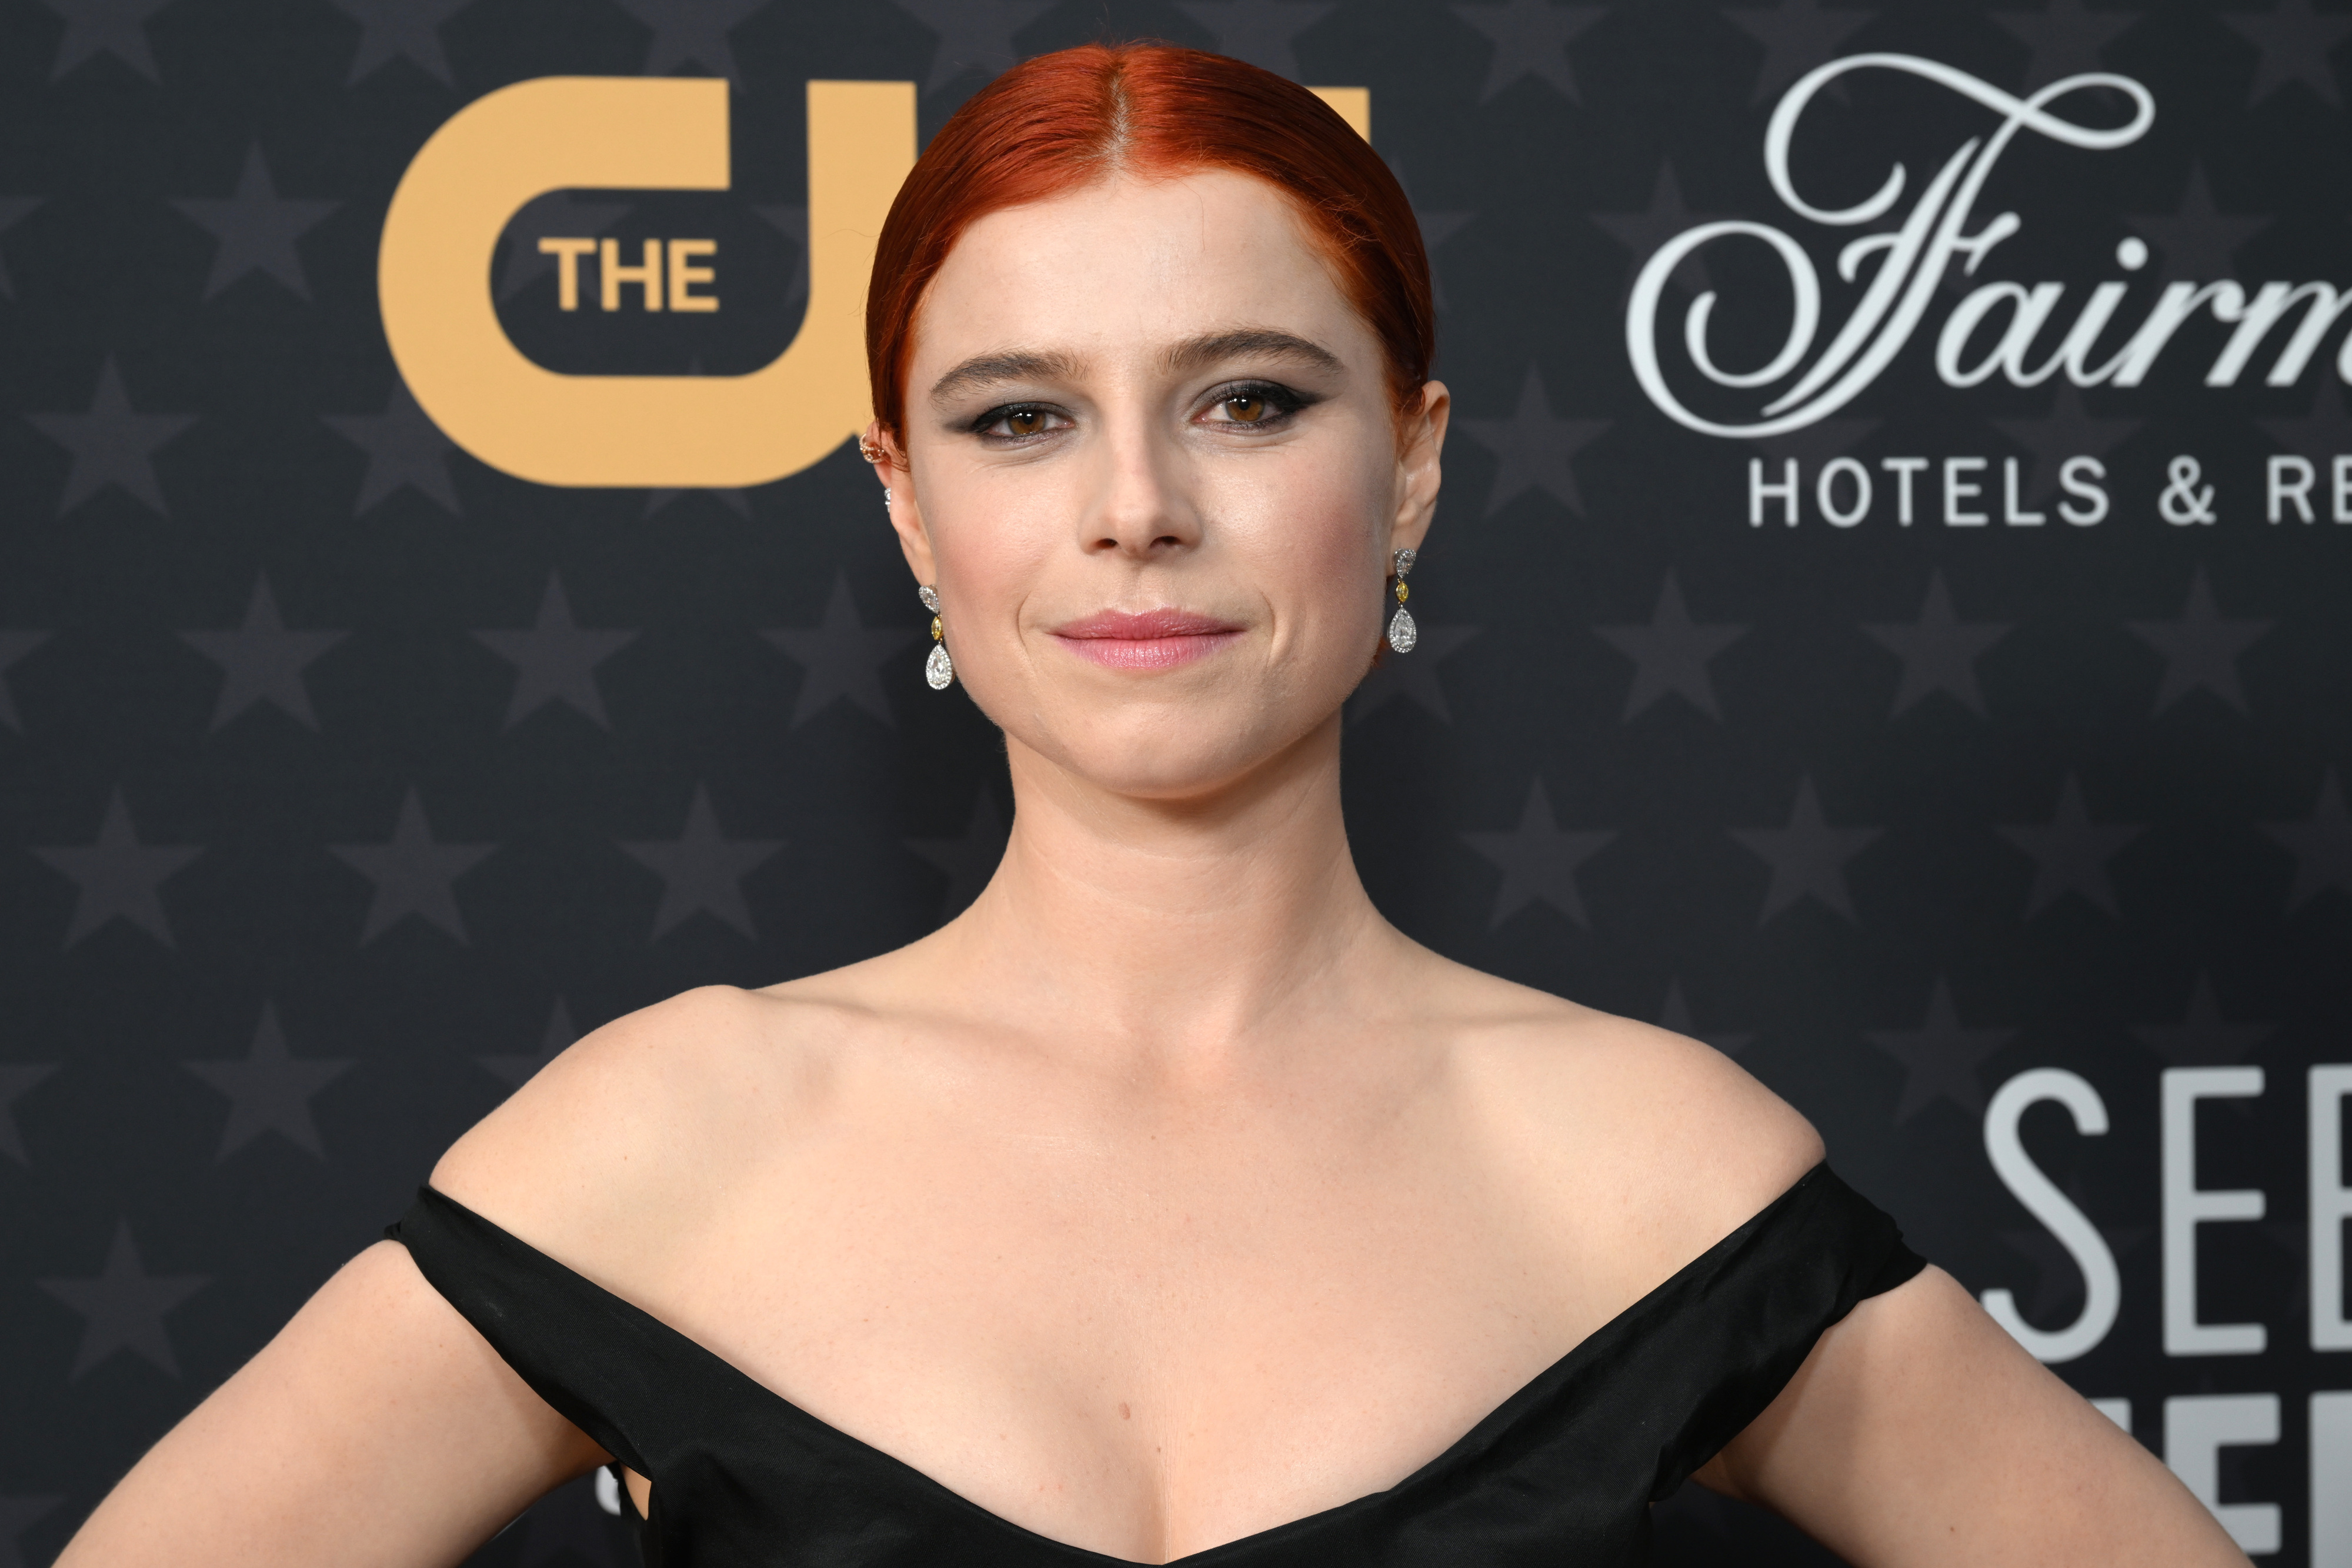 Jessie Buckley attends Champagne Collet & OBC Wines' celebration of The 28th Annual Critics Choice Awards at Fairmont Century Plaza, on January 15, 2023, in Los Angeles, California. | Source: Getty Images